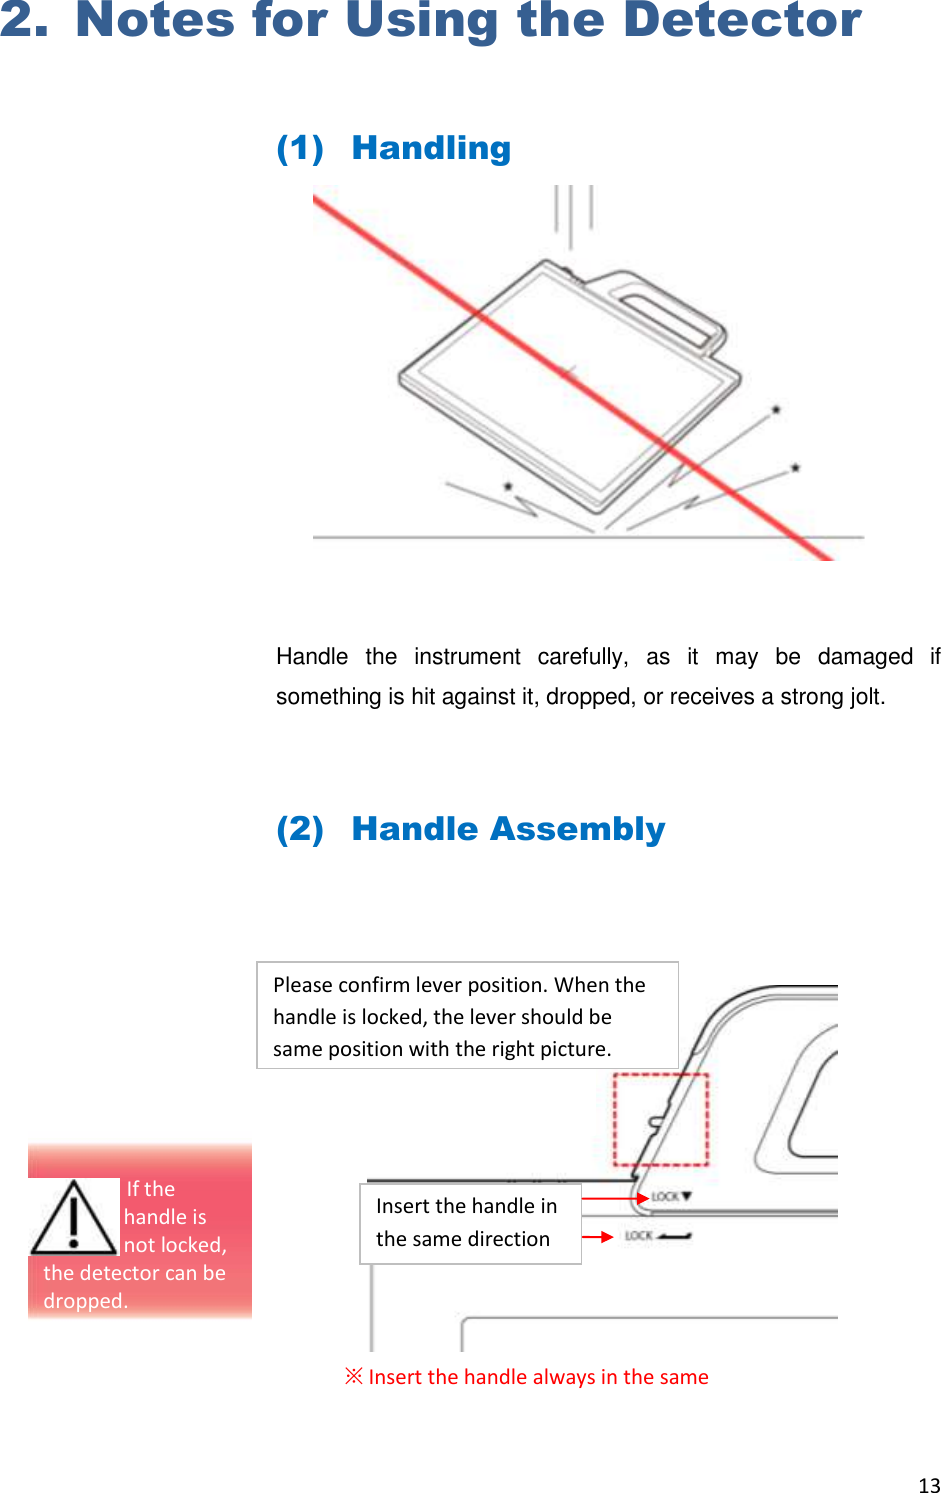 13  2. Notes for Using the Detector  (1) Handling         Handle  the  instrument  carefully,  as  it  may  be  damaged  if something is hit against it, dropped, or receives a strong jolt.  (2) Handle Assembly          ※ Insert the handle always in the same Please confirm lever position. When the handle is locked, the lever should be same position with the right picture.   Insert the handle in the same direction                                  If the  handle is  not locked, the detector can be dropped. 